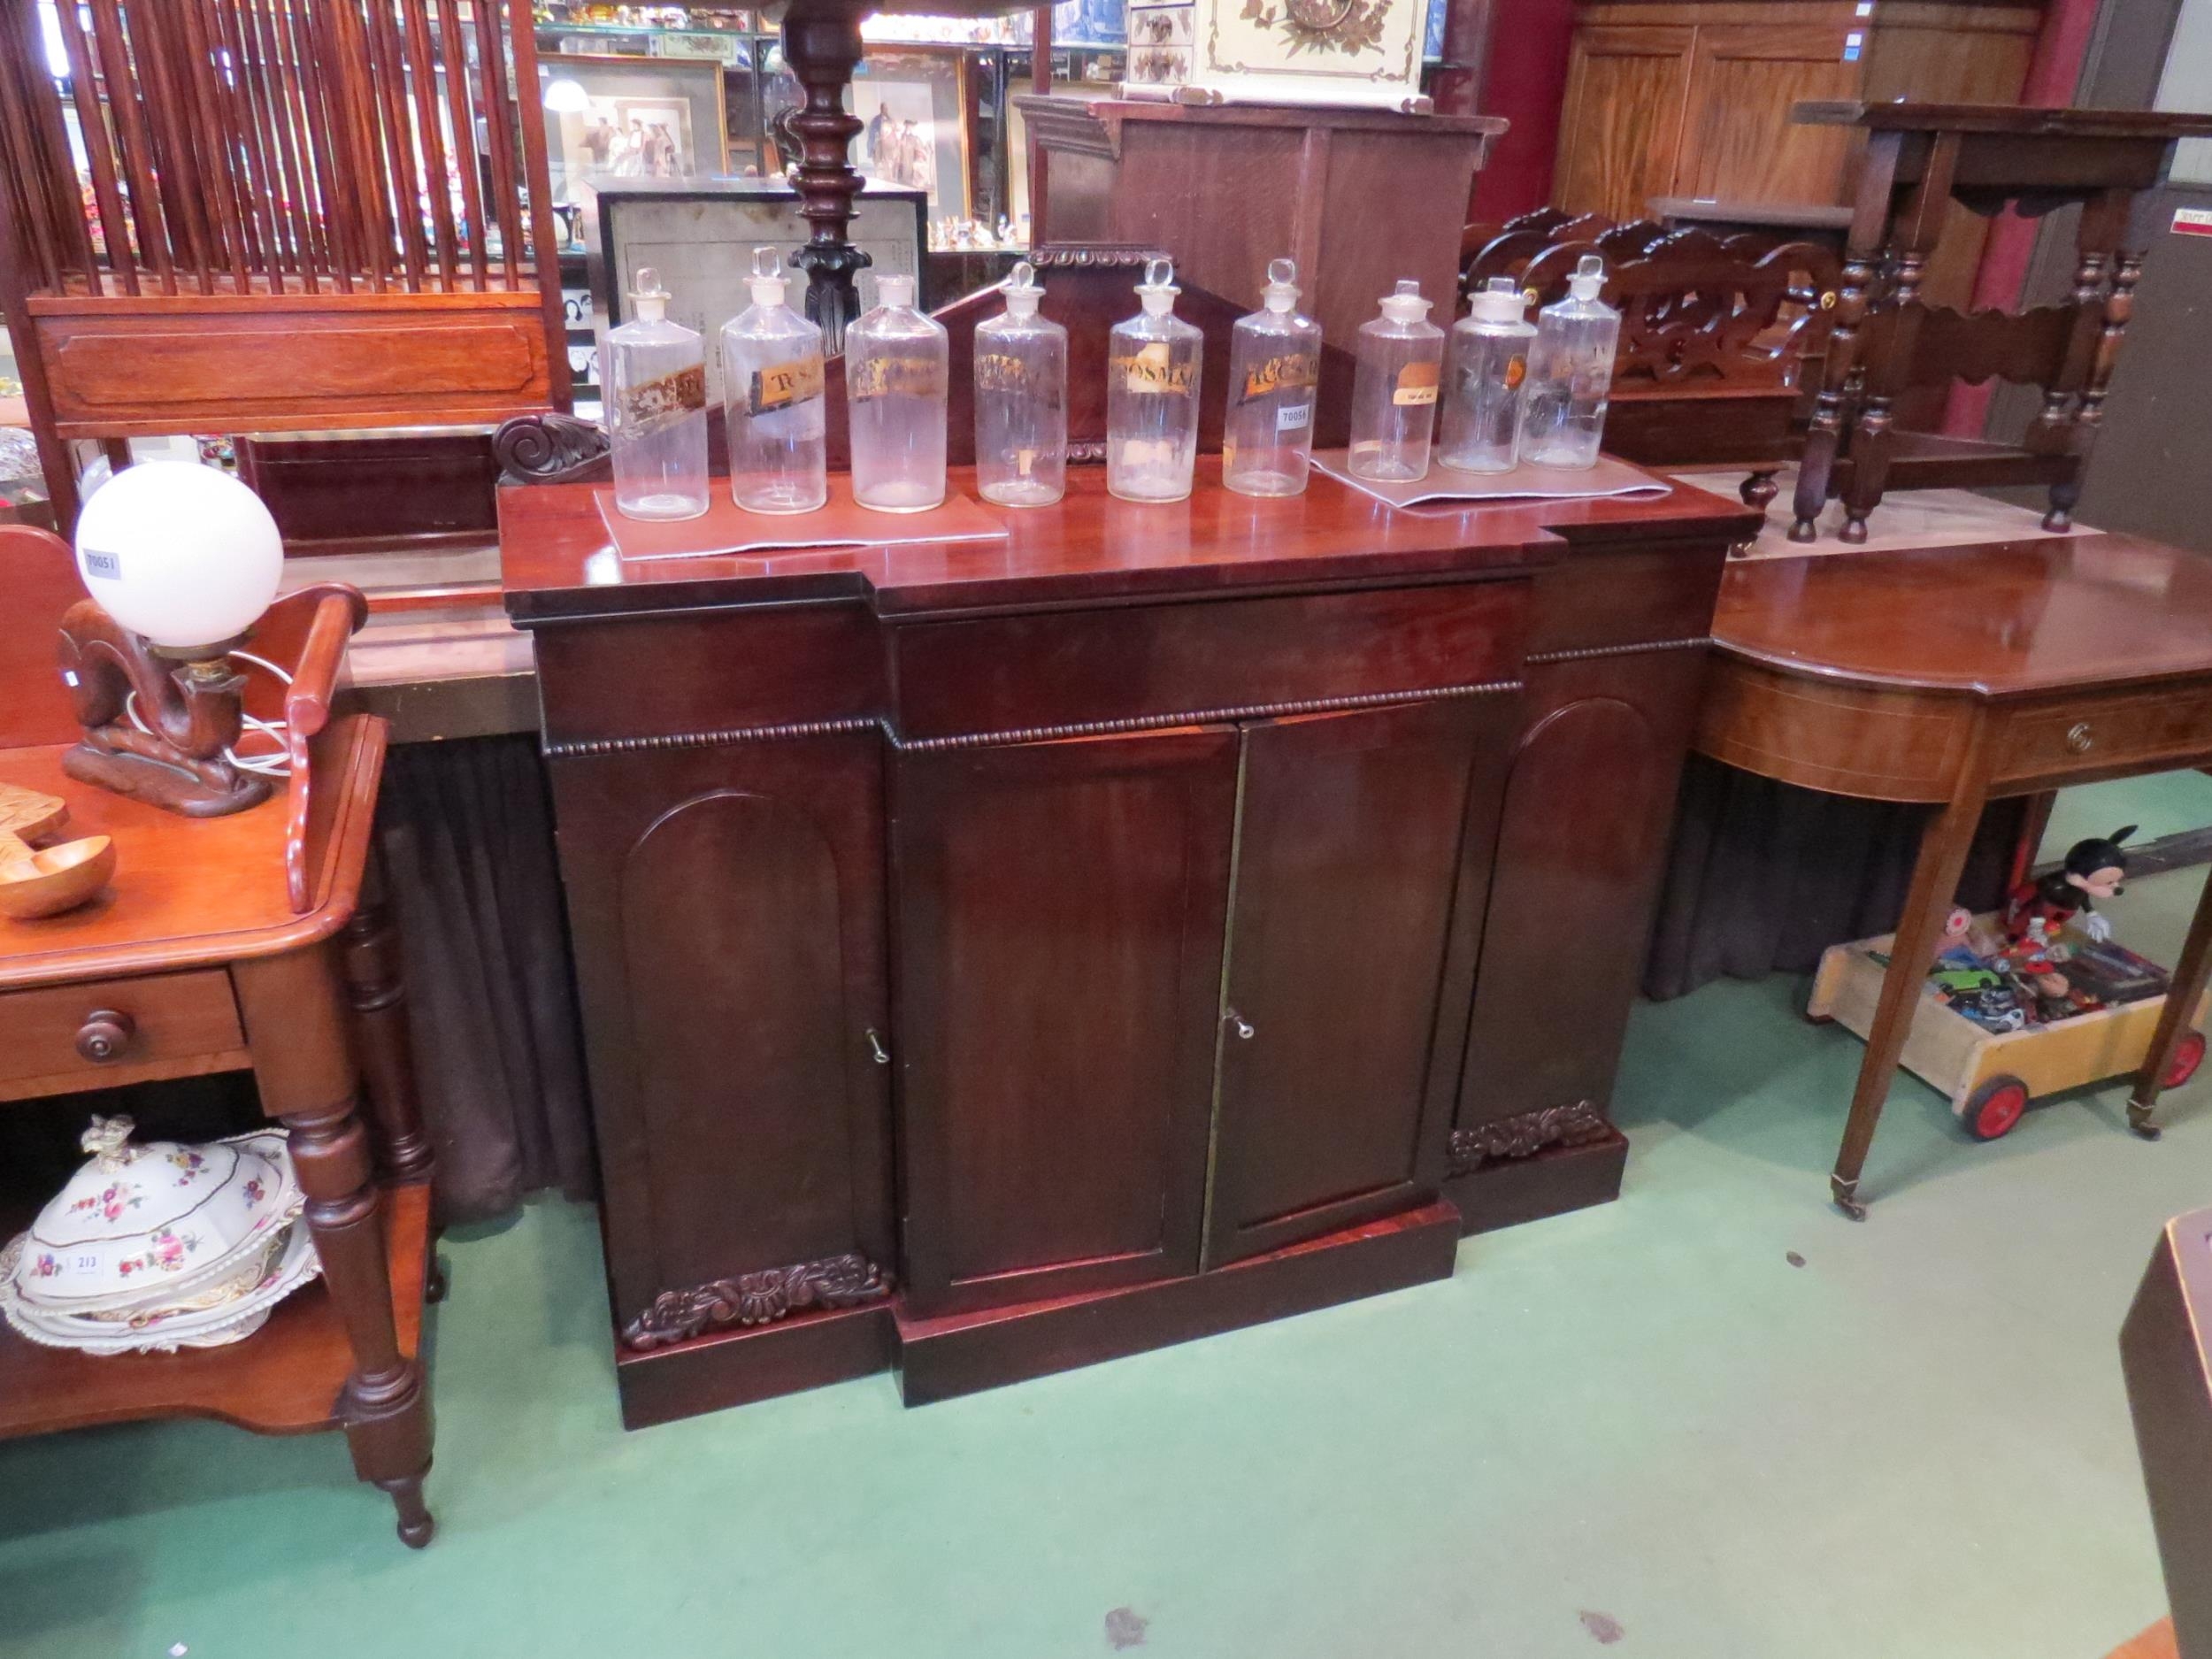 Circa 1820 a Regency flame mahogany breakfront sideboard with central frieze drawer over a four door